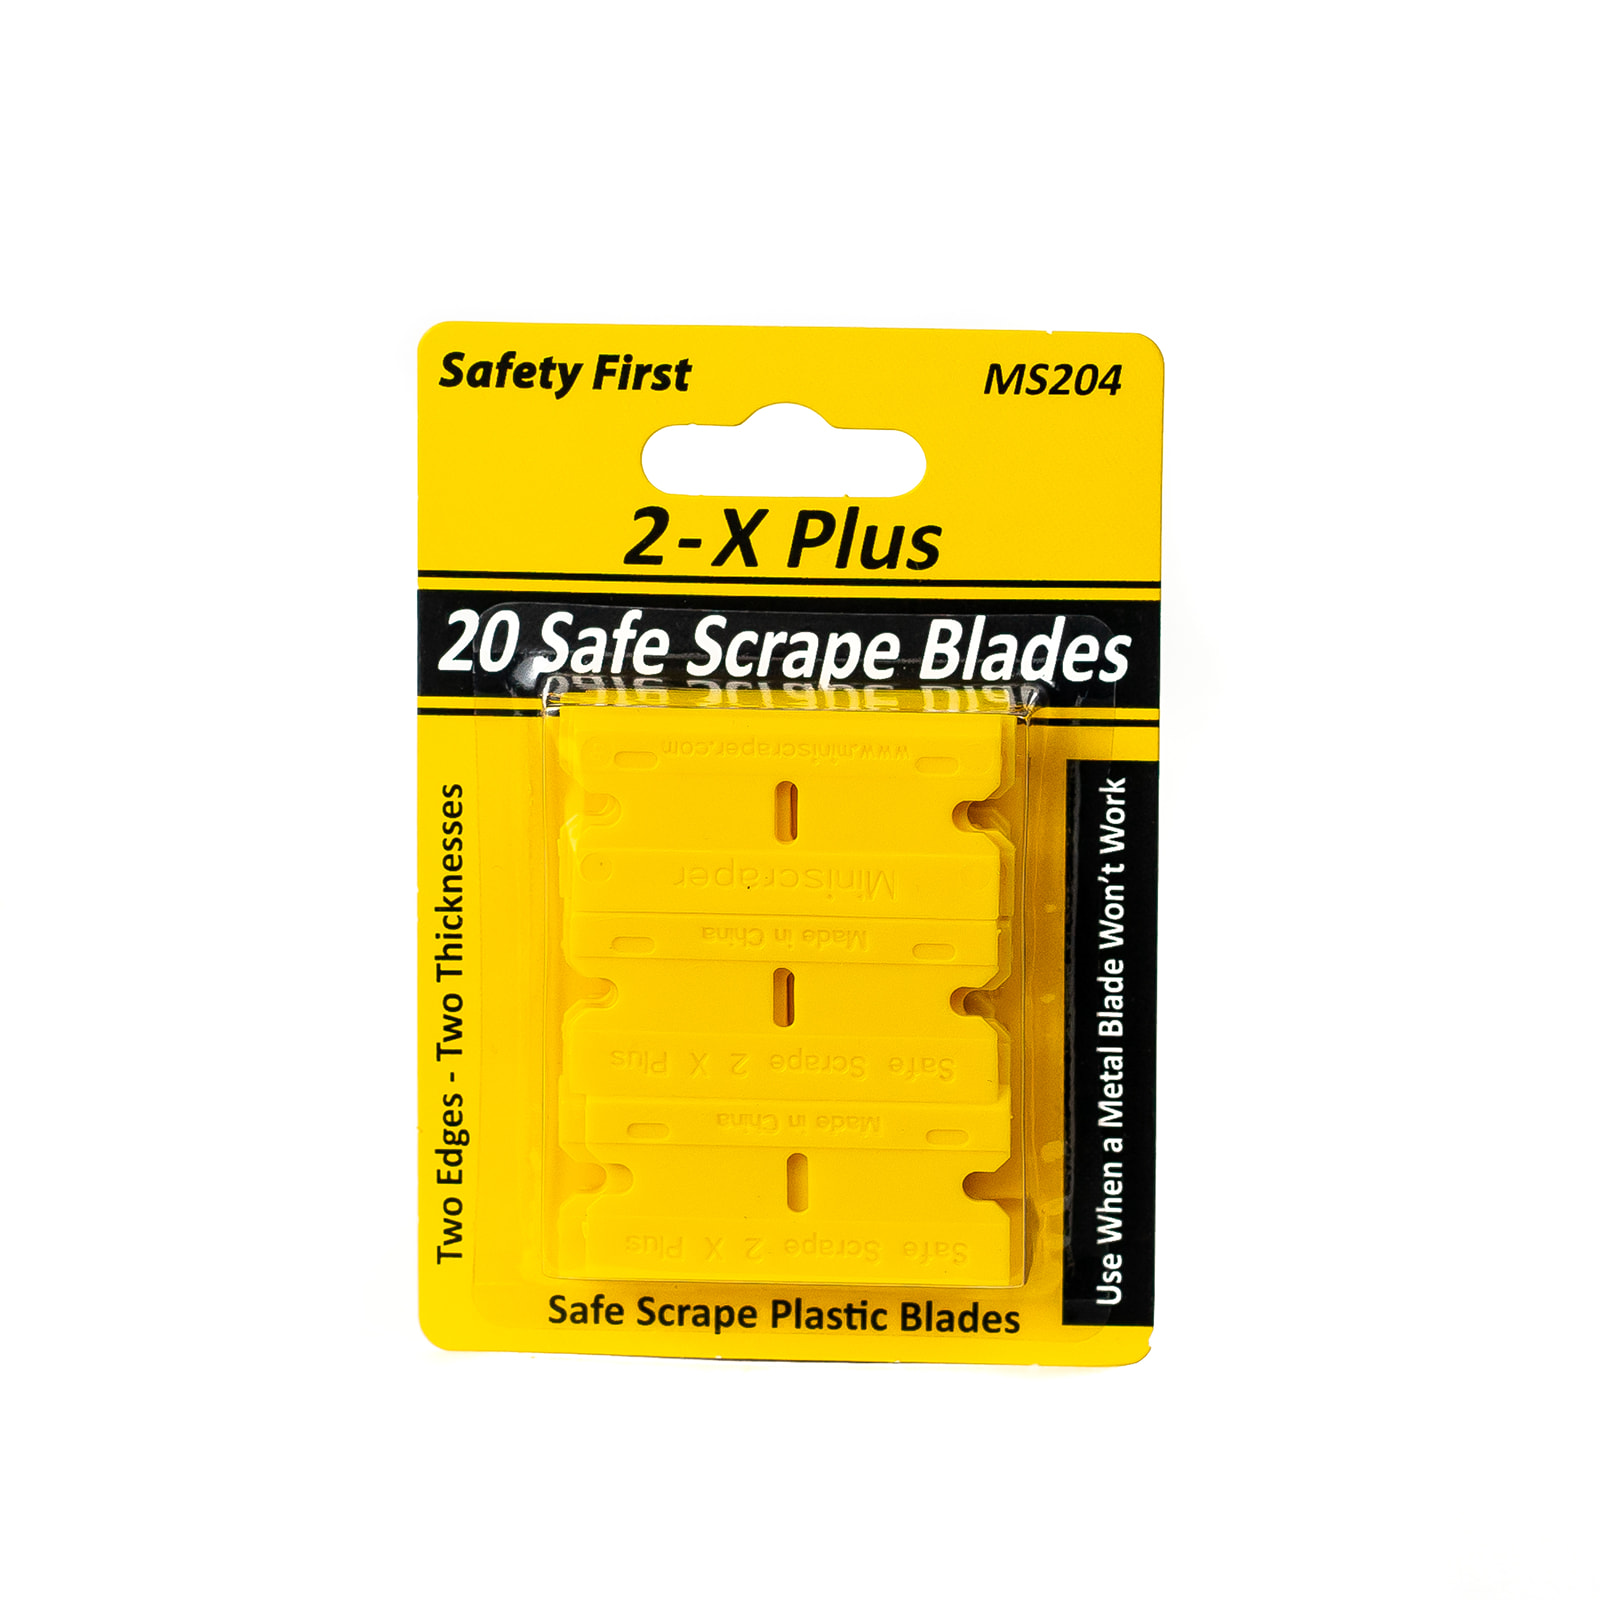 NEW! 2-X Plus Dual Edged - Two Thicknesses Plastic Blades - 20 Blade  Blister Pack - 4 Packs - Razor Blade Scrapers, Cutters Cleaners & Small  Tools